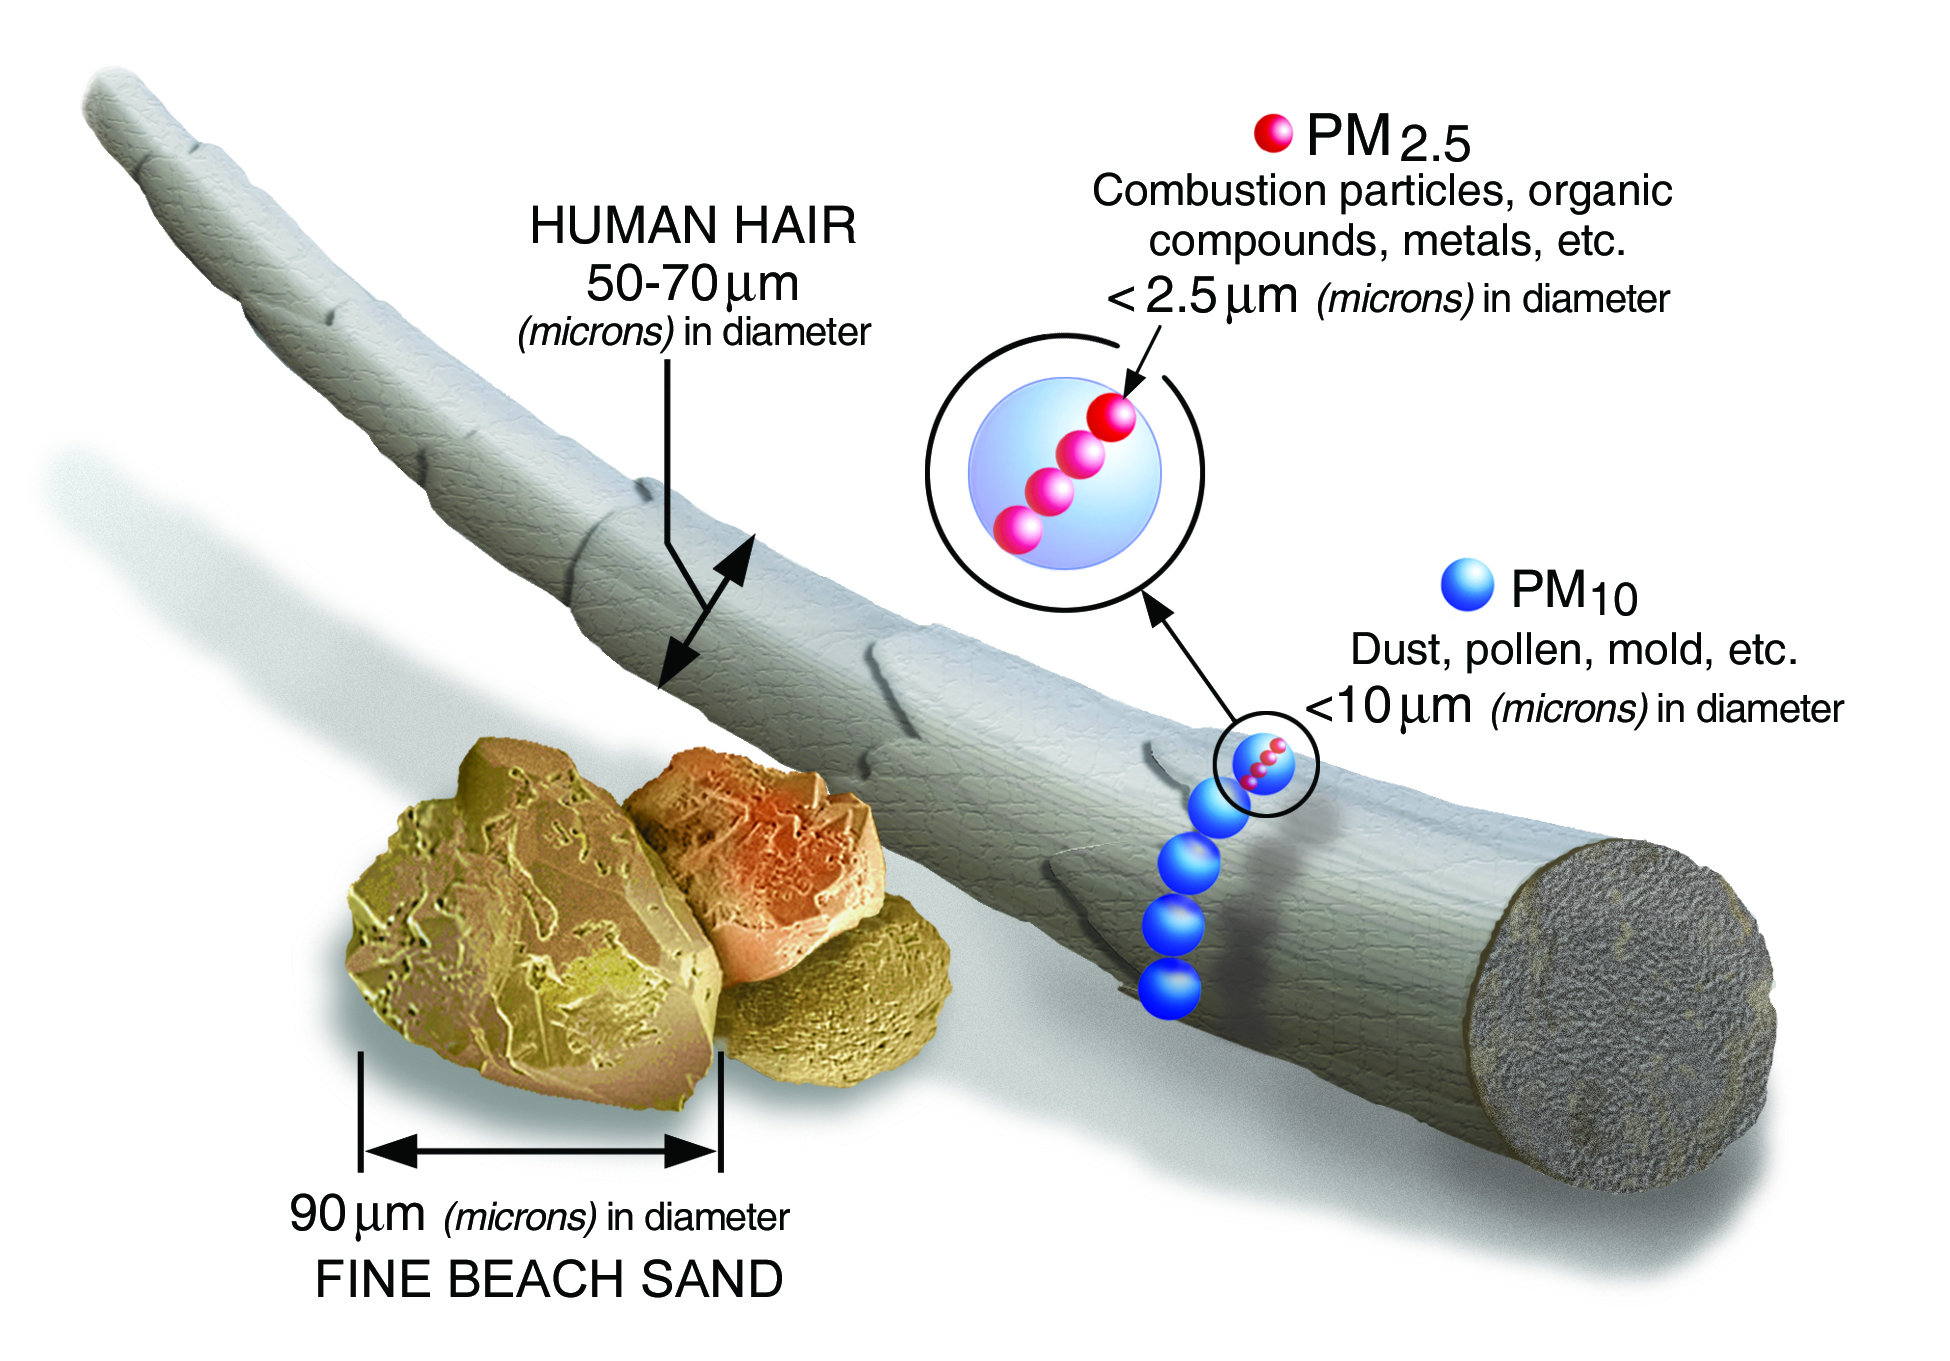 Image illustrating the size of particulate matter, showing that larger particulate matter, or PM10, includes dust, pollen, and mold, and smaller particulate matter, or PM2.5, includes combustion particles, organic compounds, and metals.